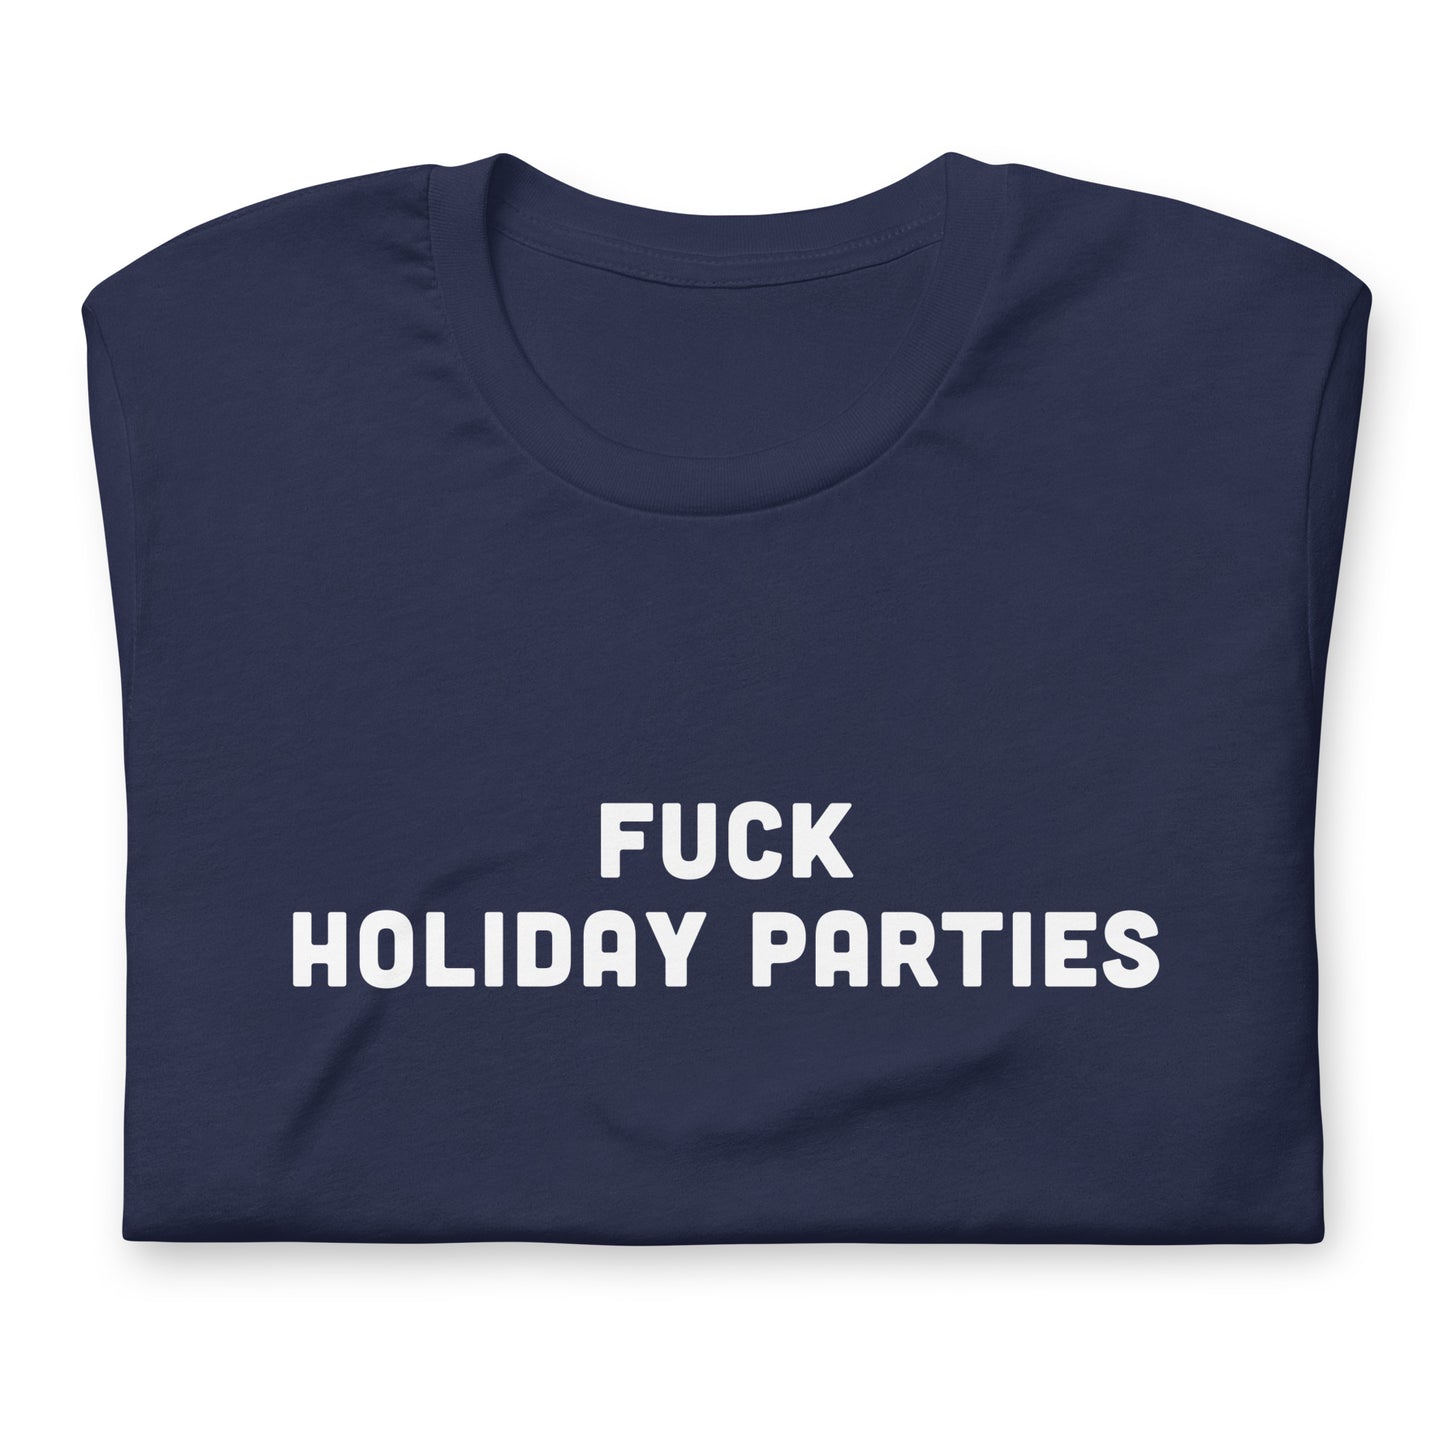 Fuck Holiday Parties T-Shirt Size XL Color Black